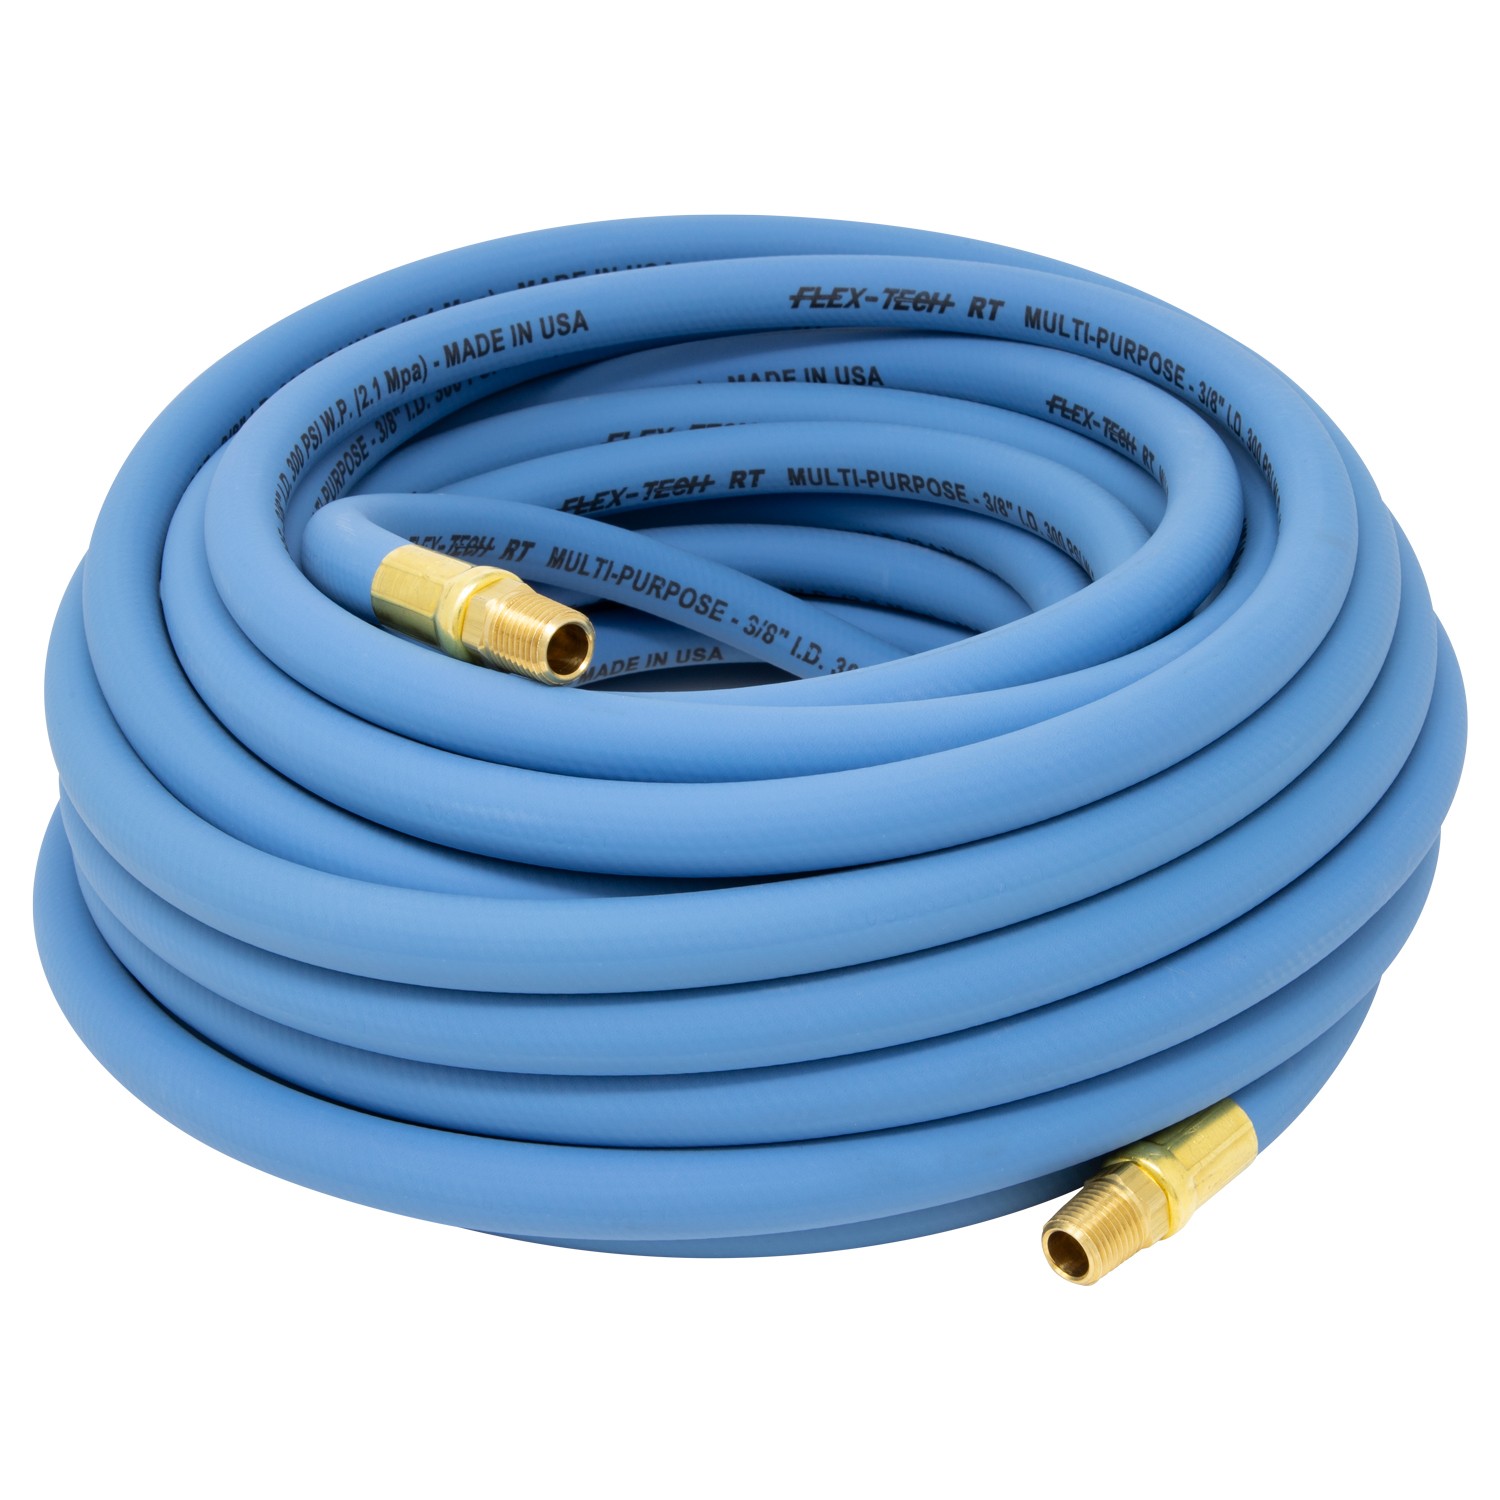 3/8" x 50' Synthetic Rubber Air Hose